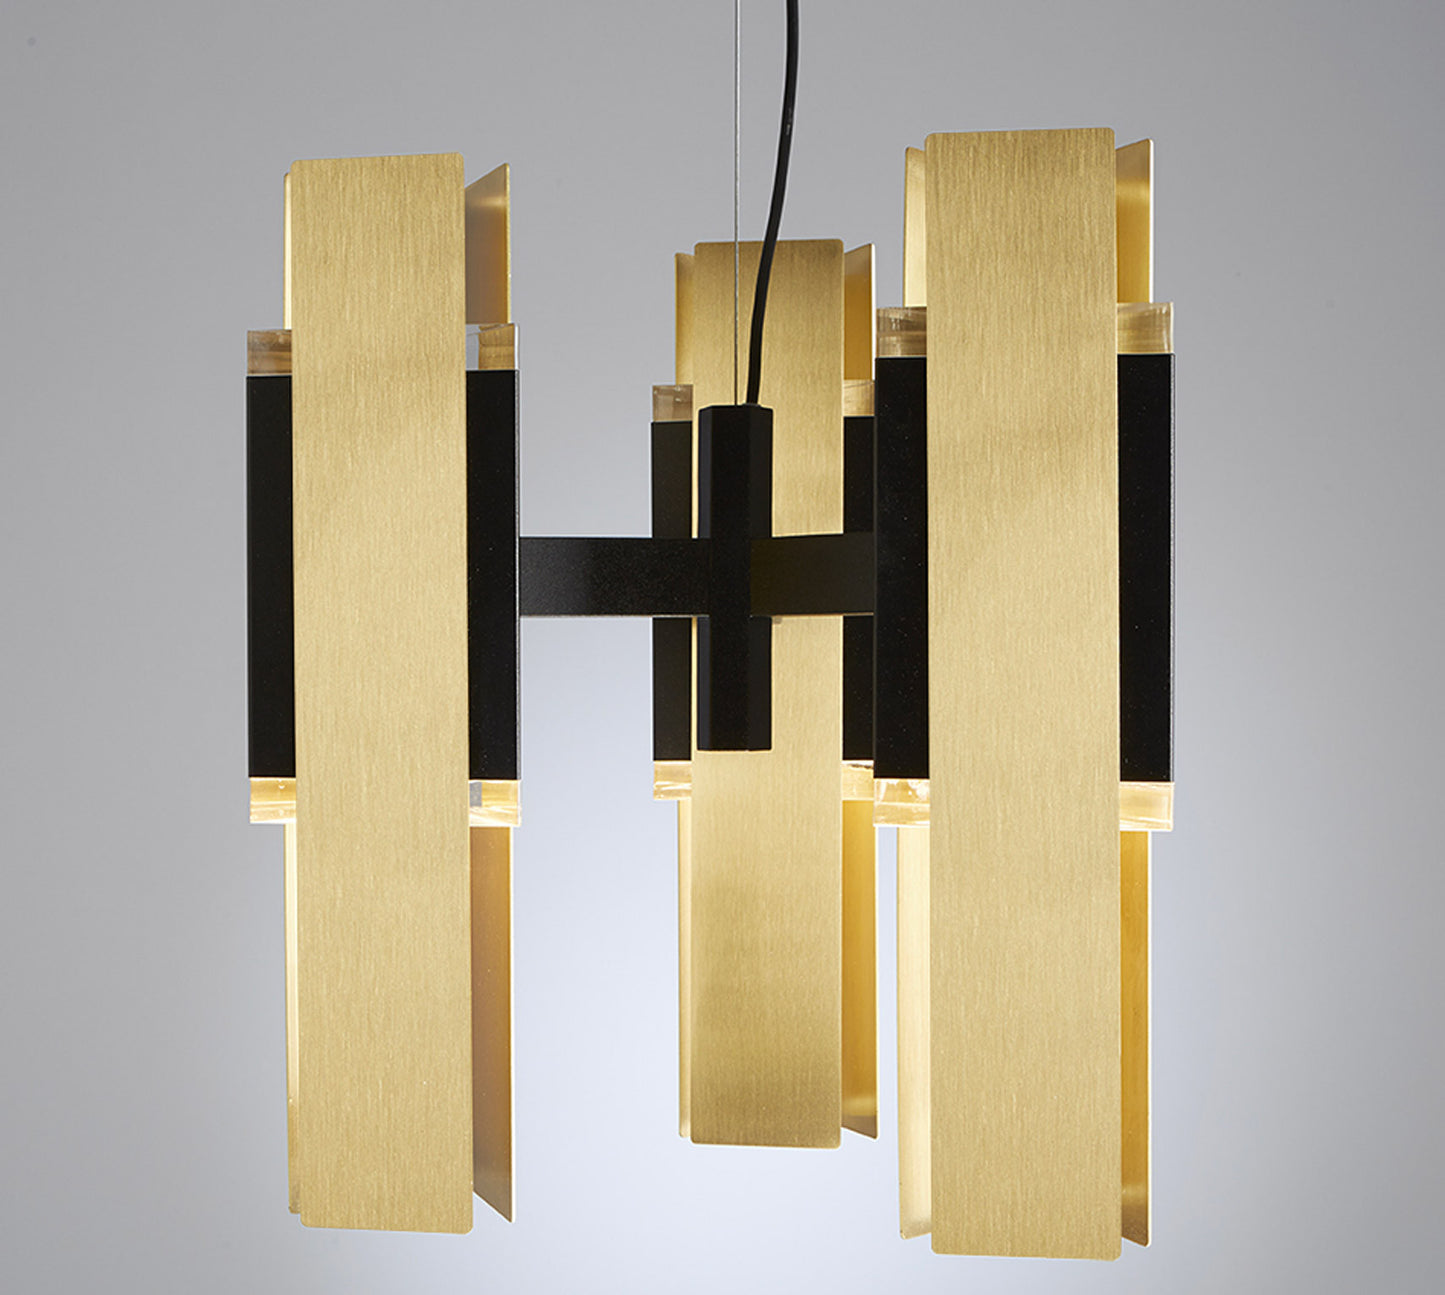 EXVALIBUR CHANDELIER 559.23 BY TOOY $3,300.00